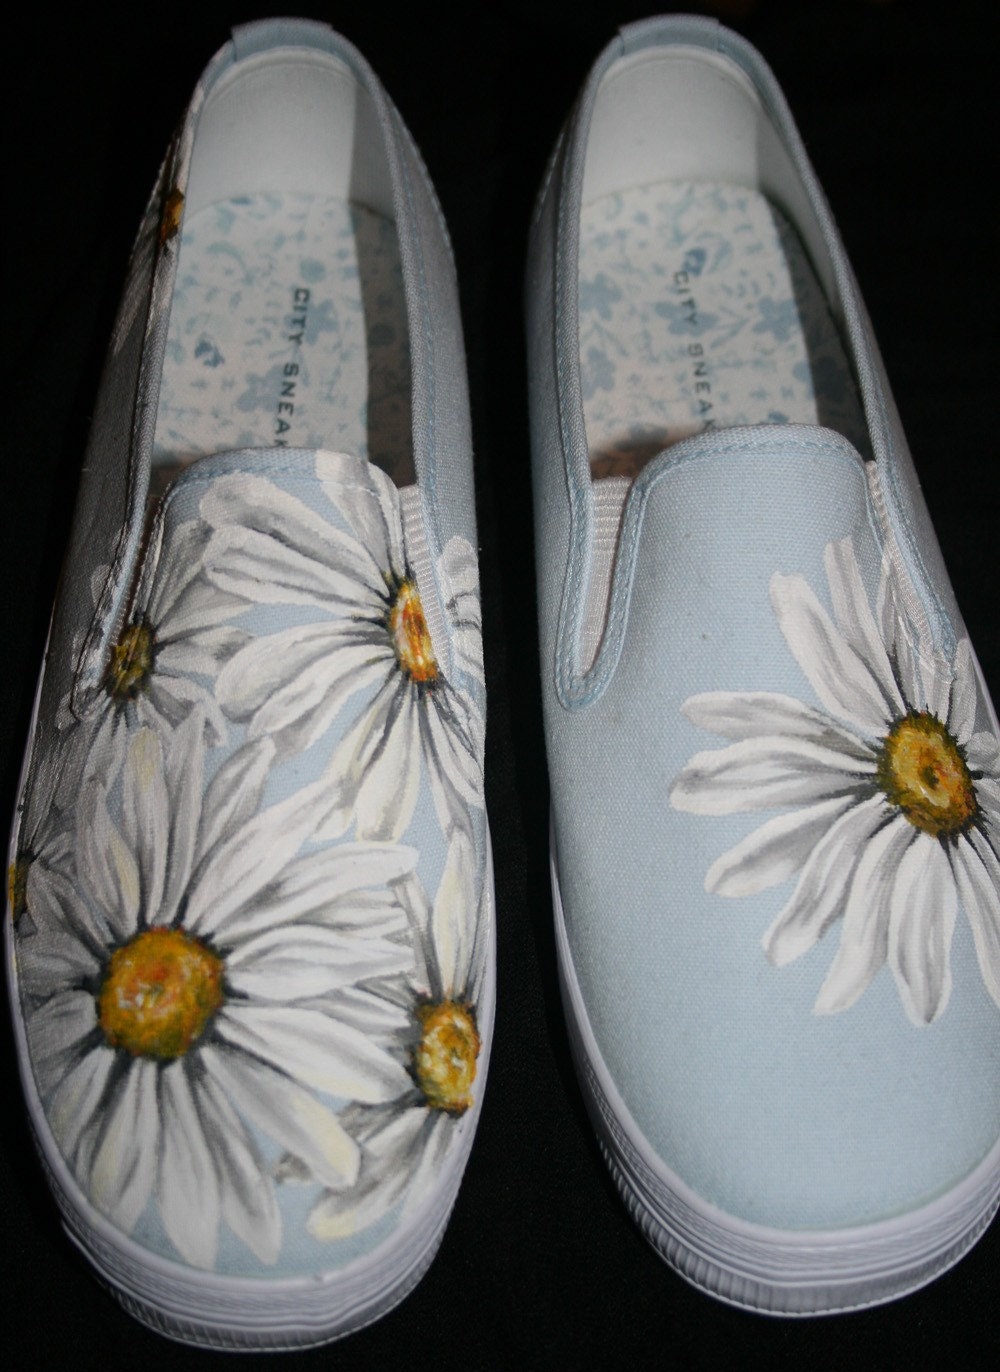 shoes painted hand daisy paint diy flowers sneakers tenis pintados paints adorable mano pair bags zapatos sunflowers